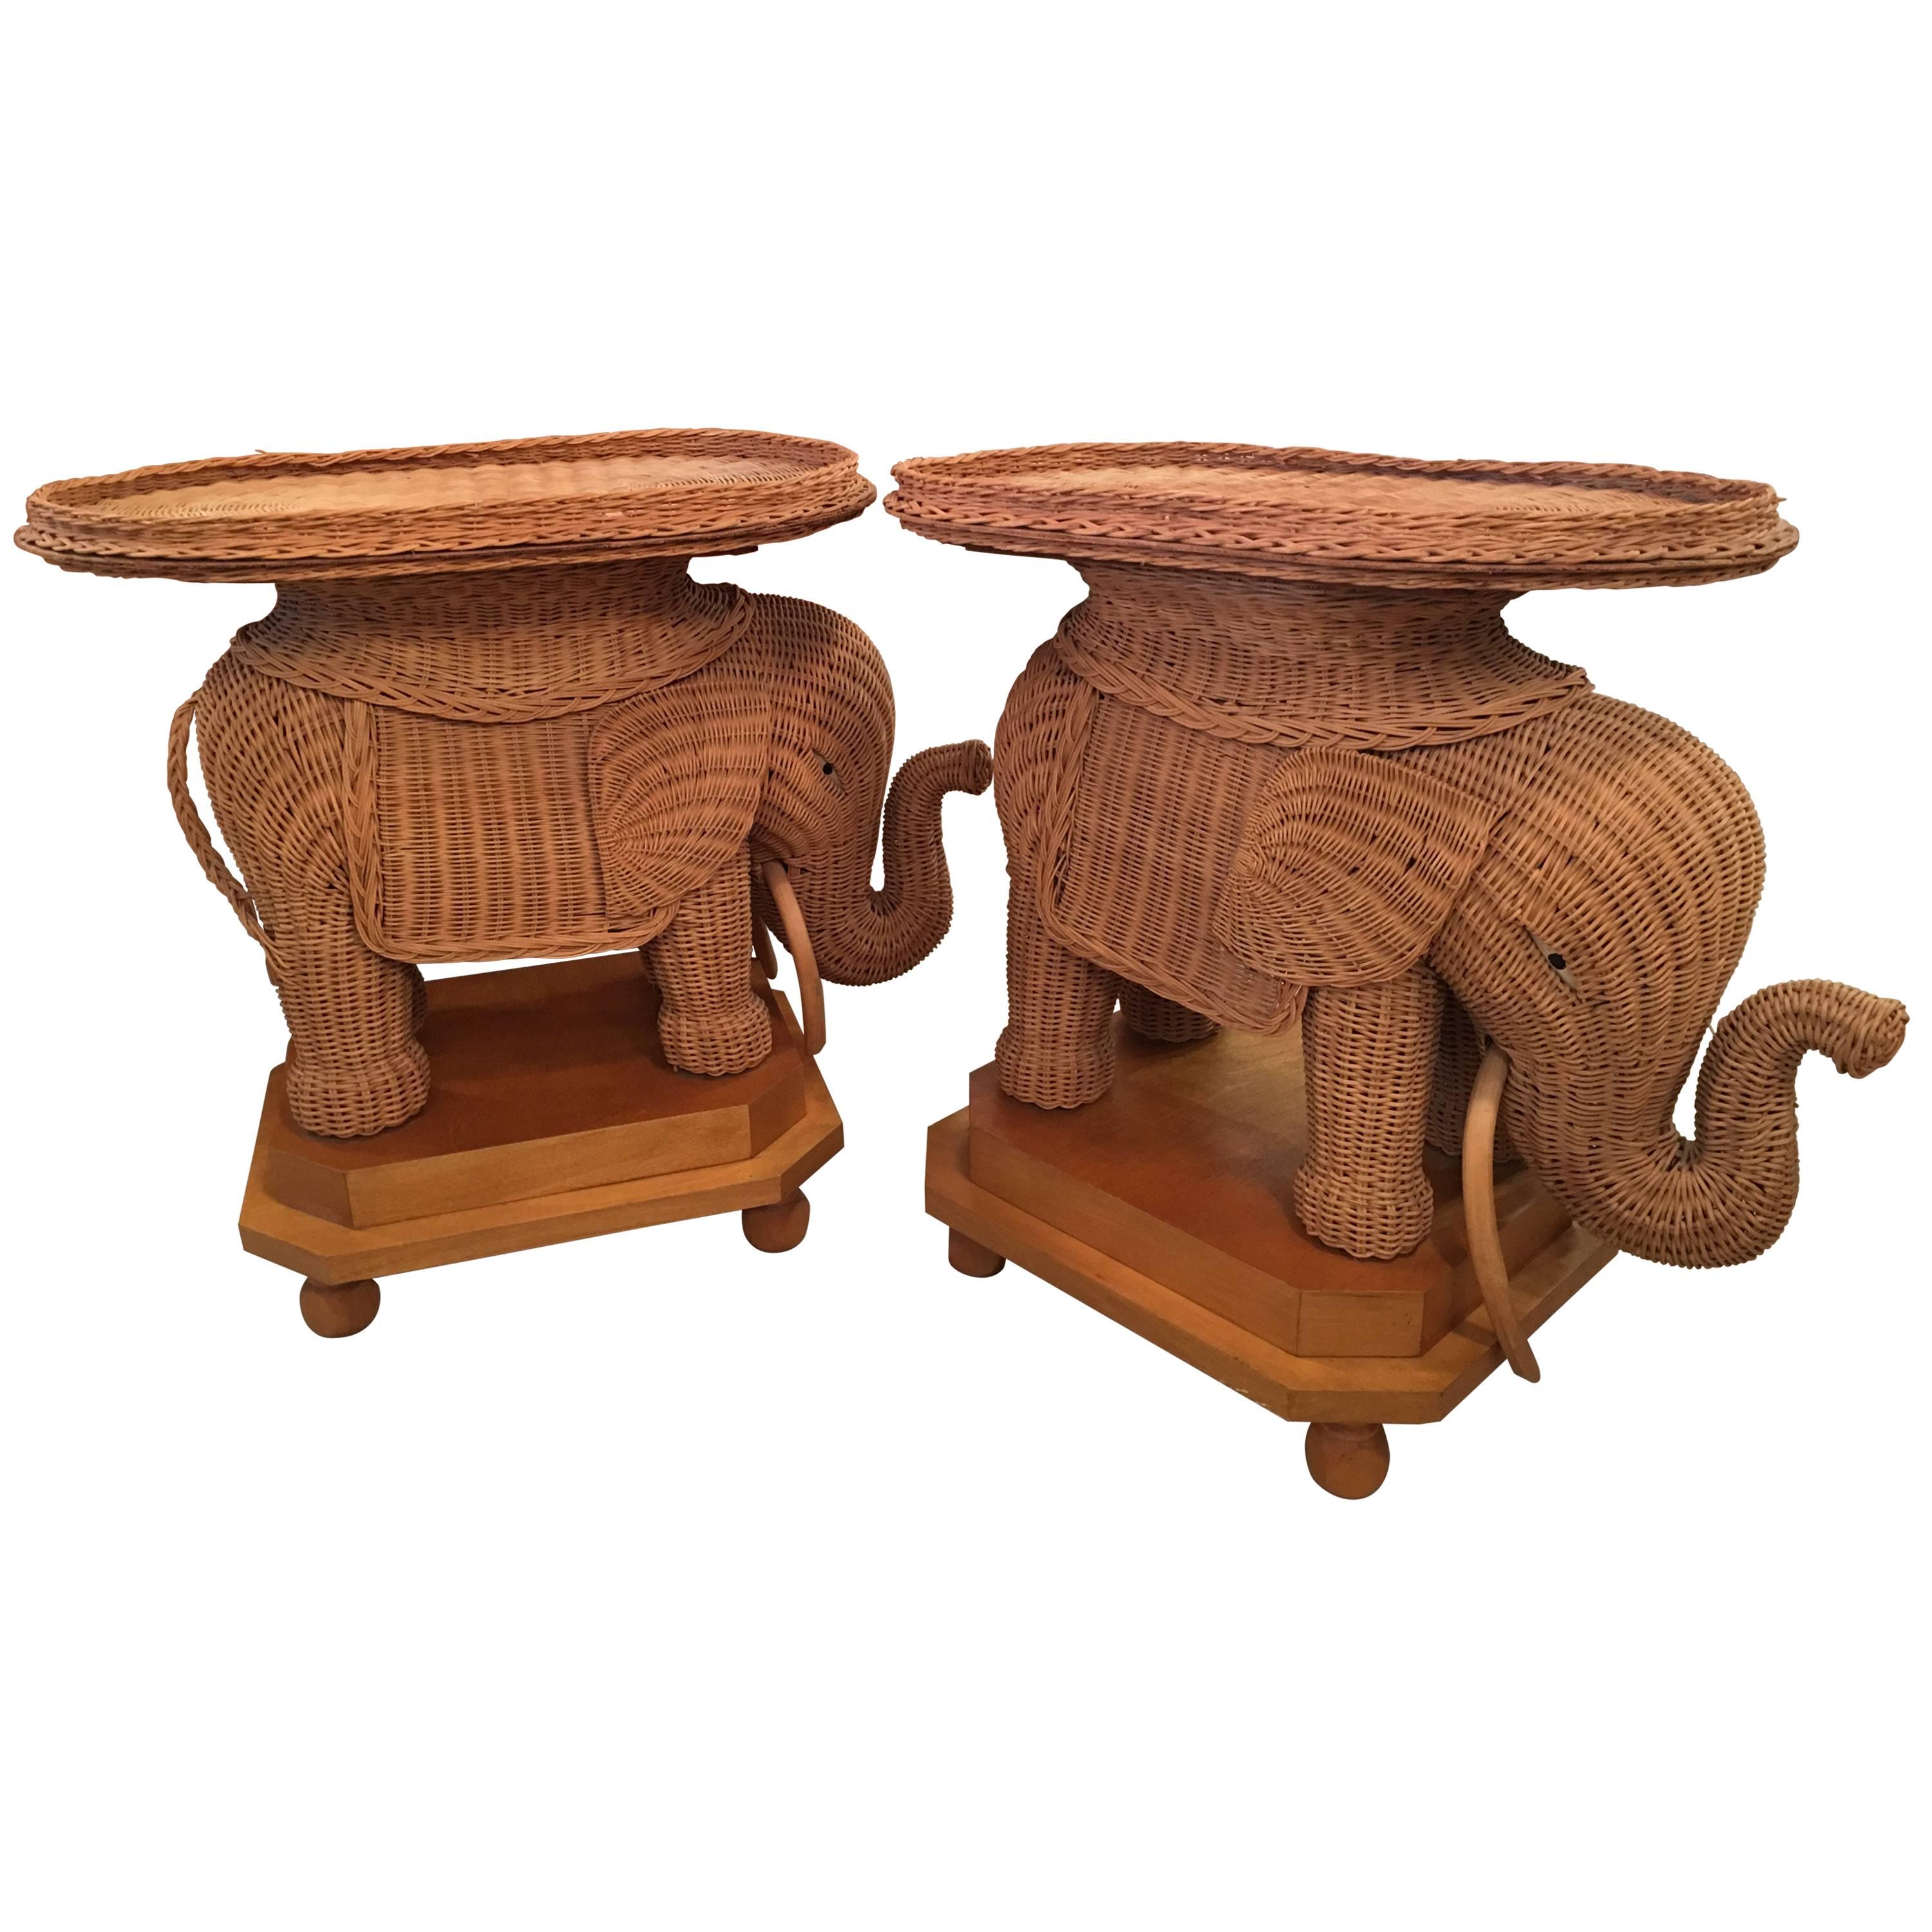 Pair of Wicker Elephant Garden Stool Stands End Side Tables Palm Beach